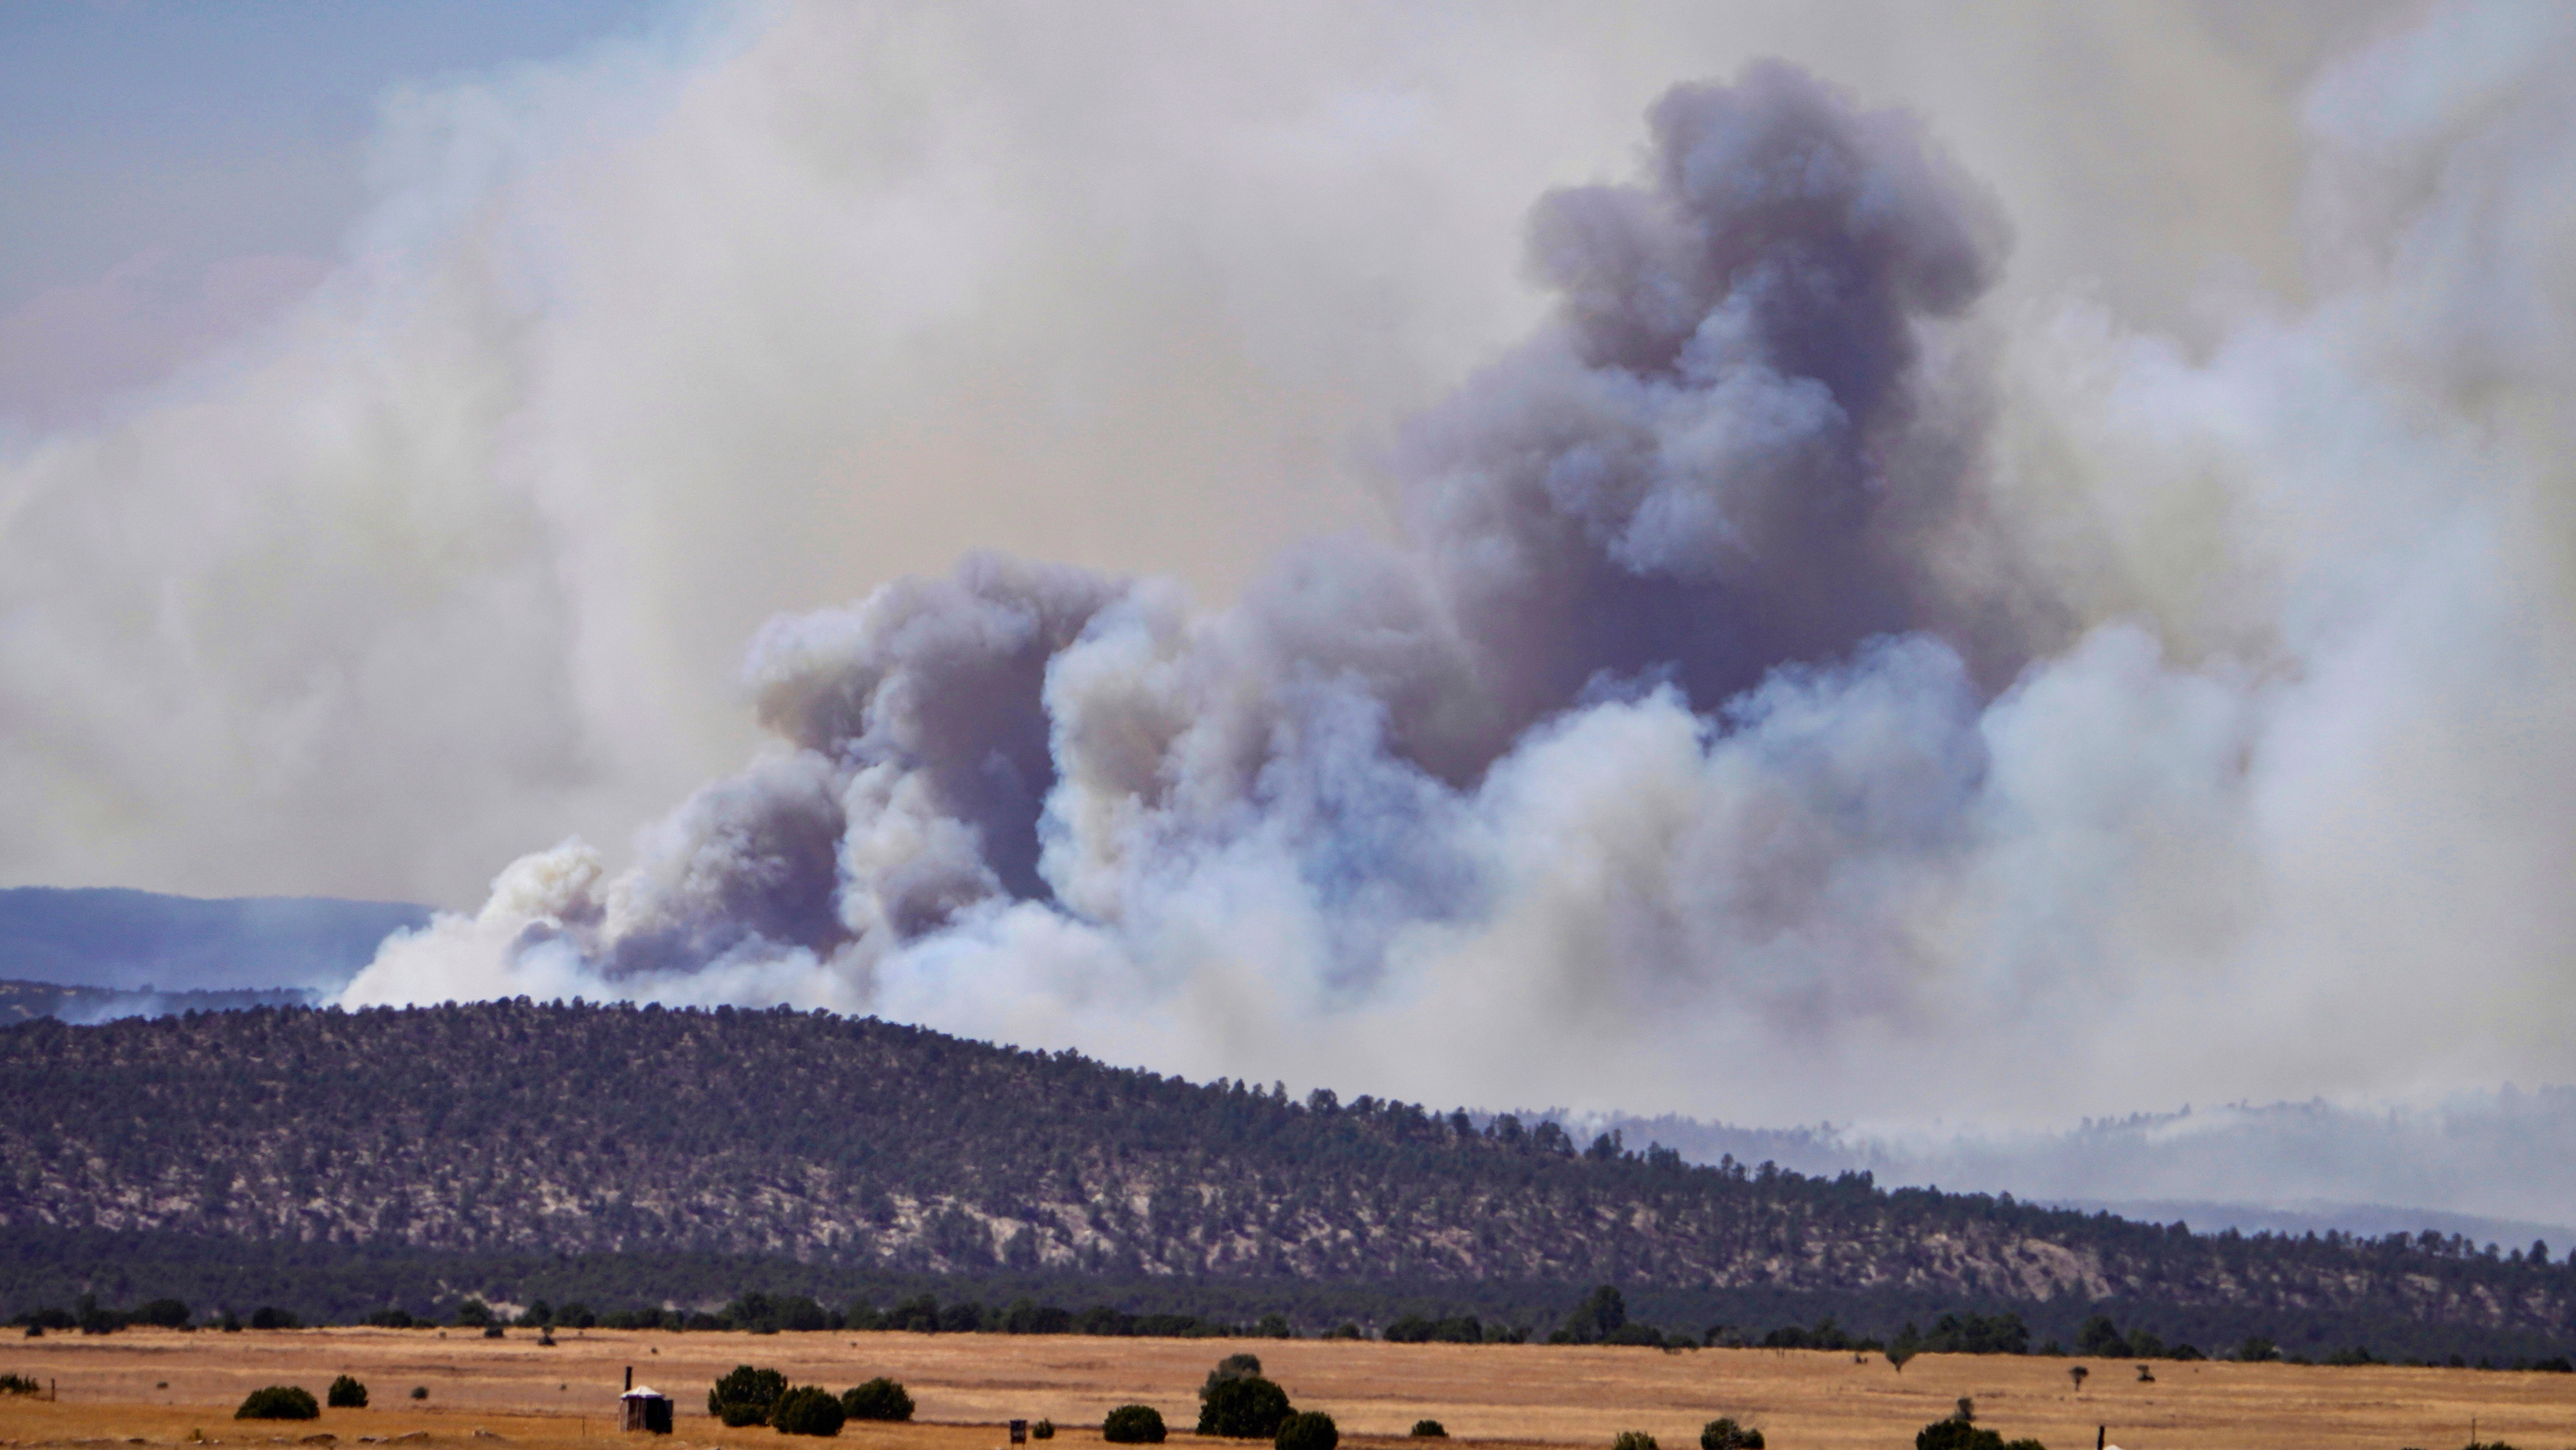 Wind is pushing the fires to expand. (Photo: ROBERTO E. ROSALES, AP)